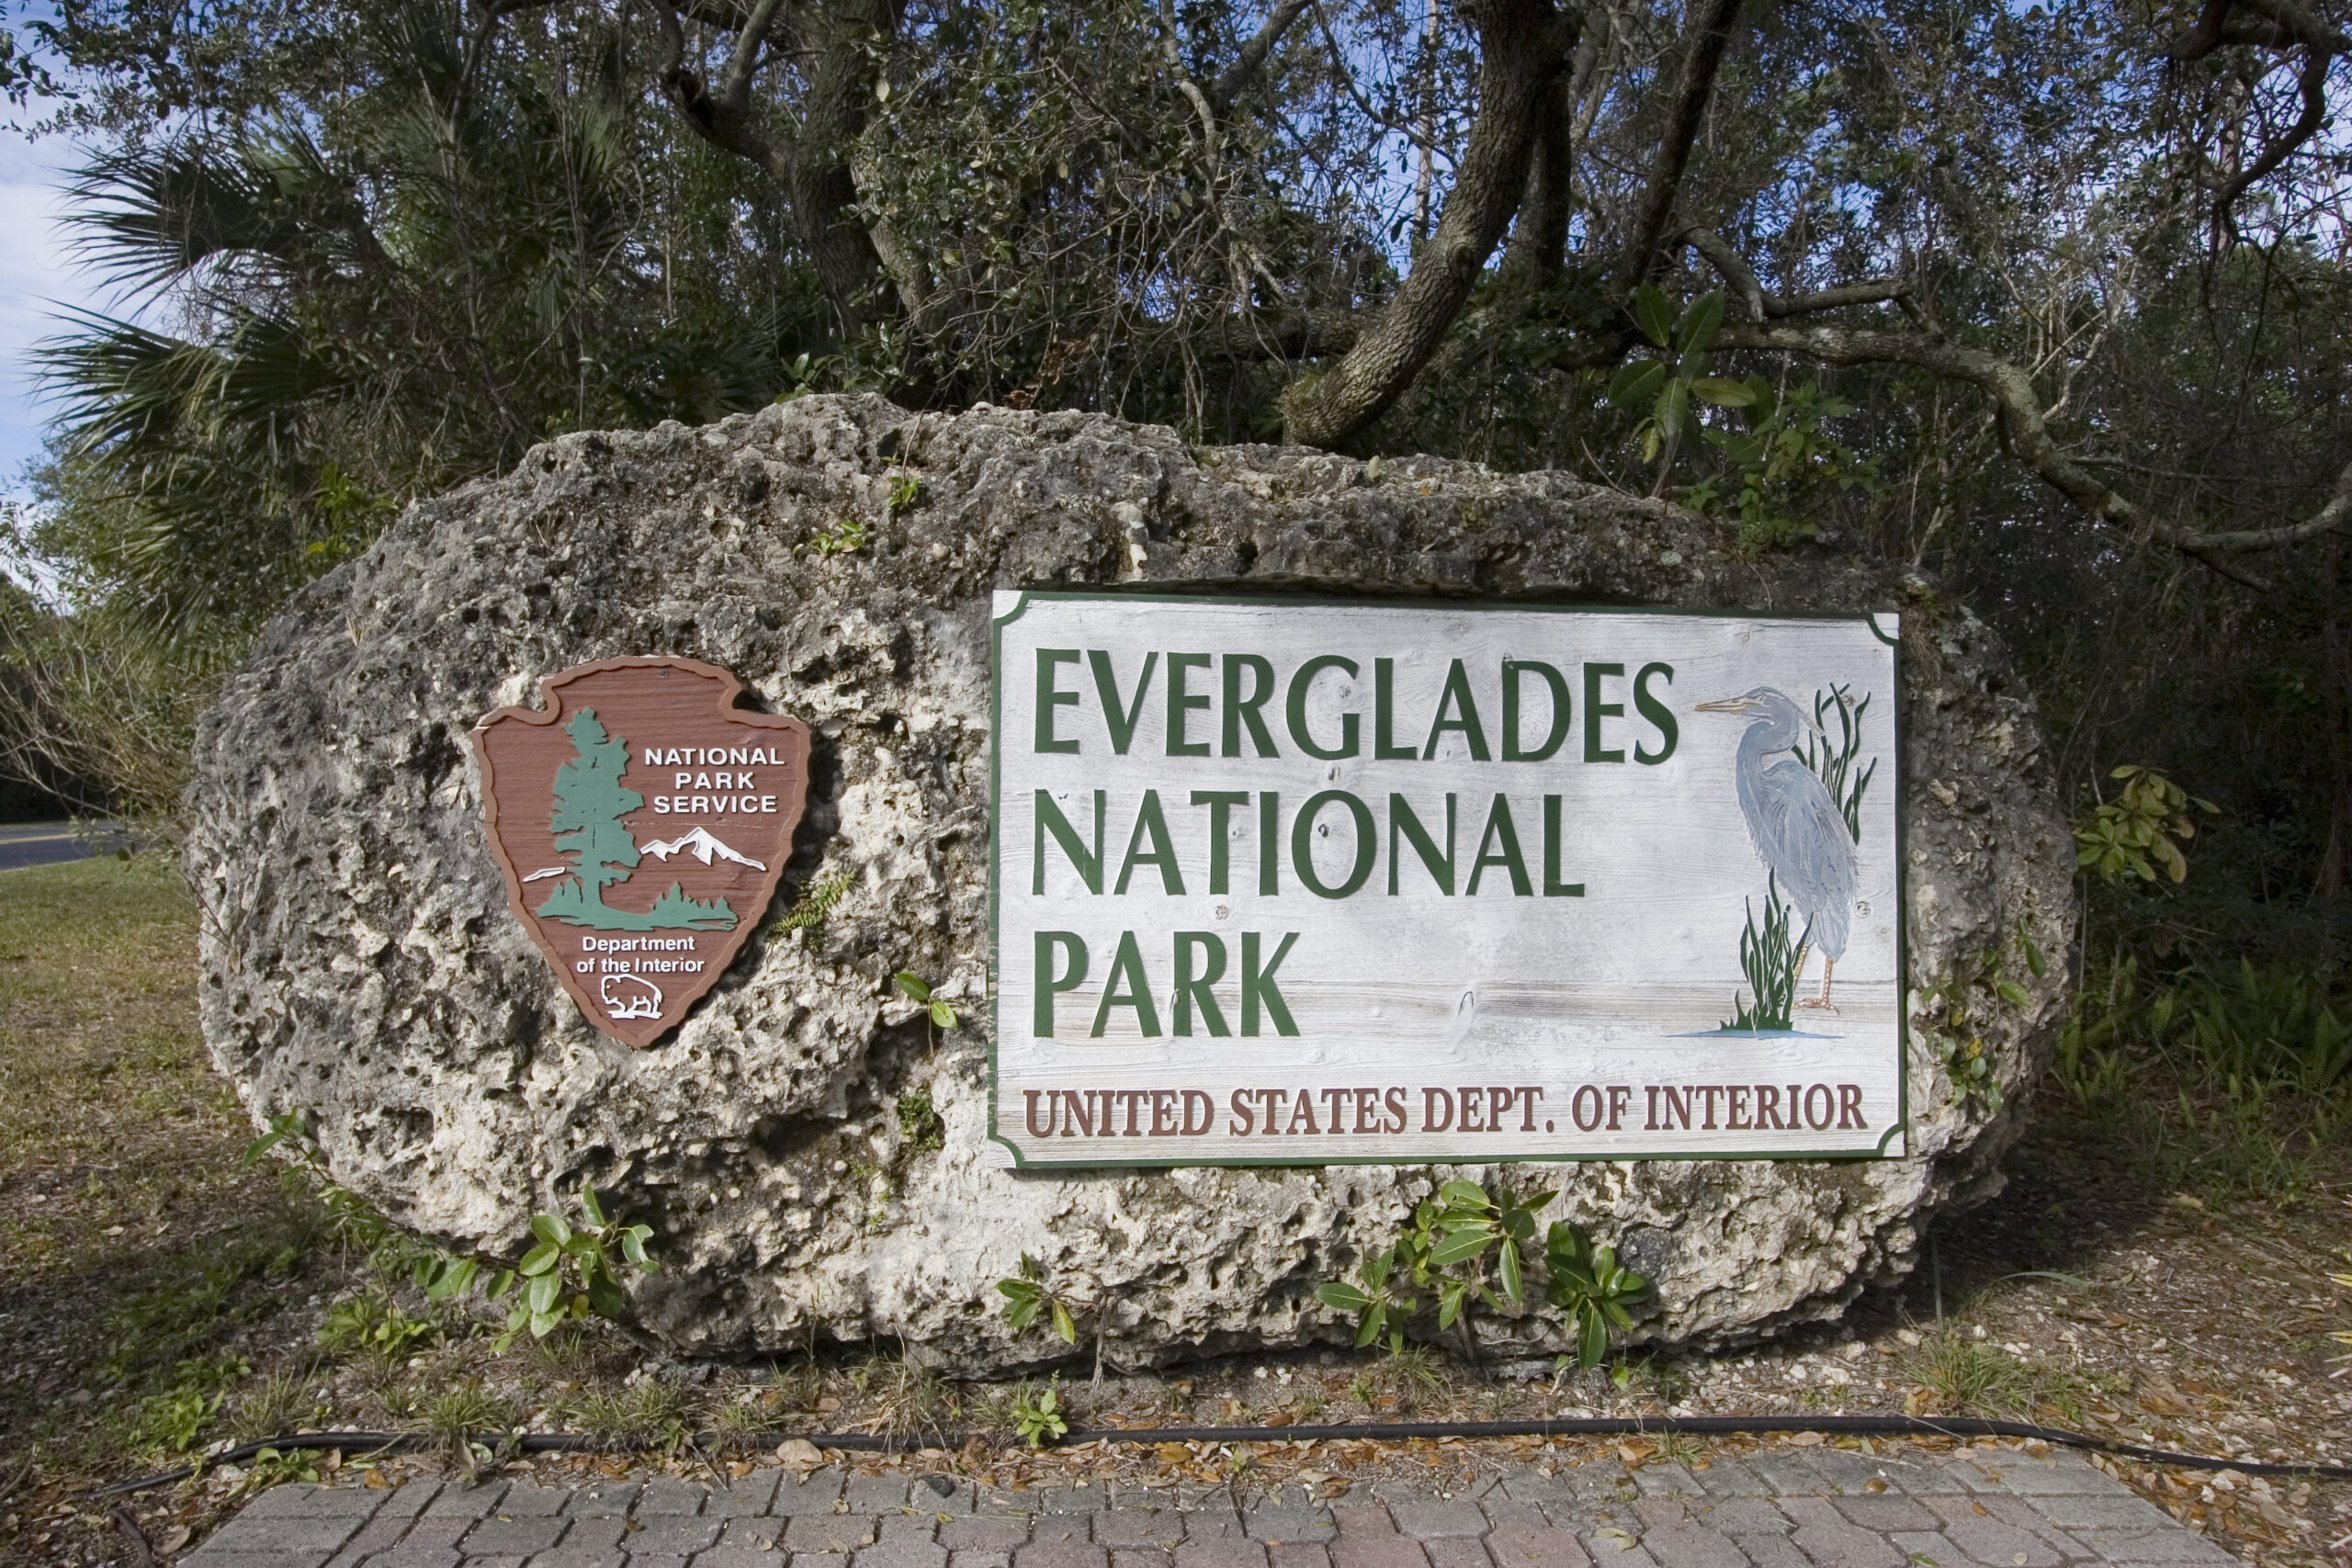 Lunch & Learn: Steven Henry & The Everglades